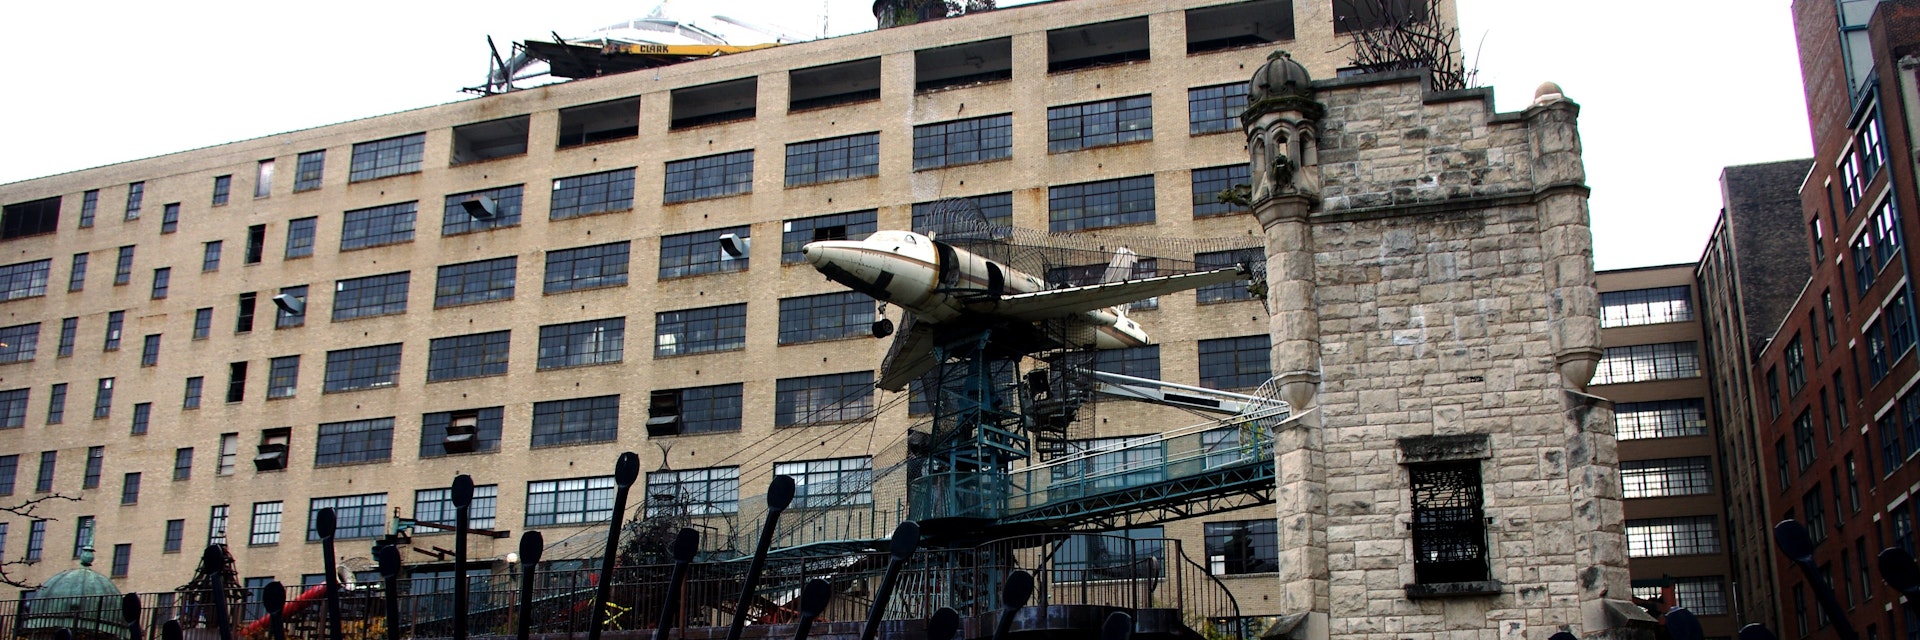 The playground at the City Museum with airplane tower and hanging school bus in St. Louis.